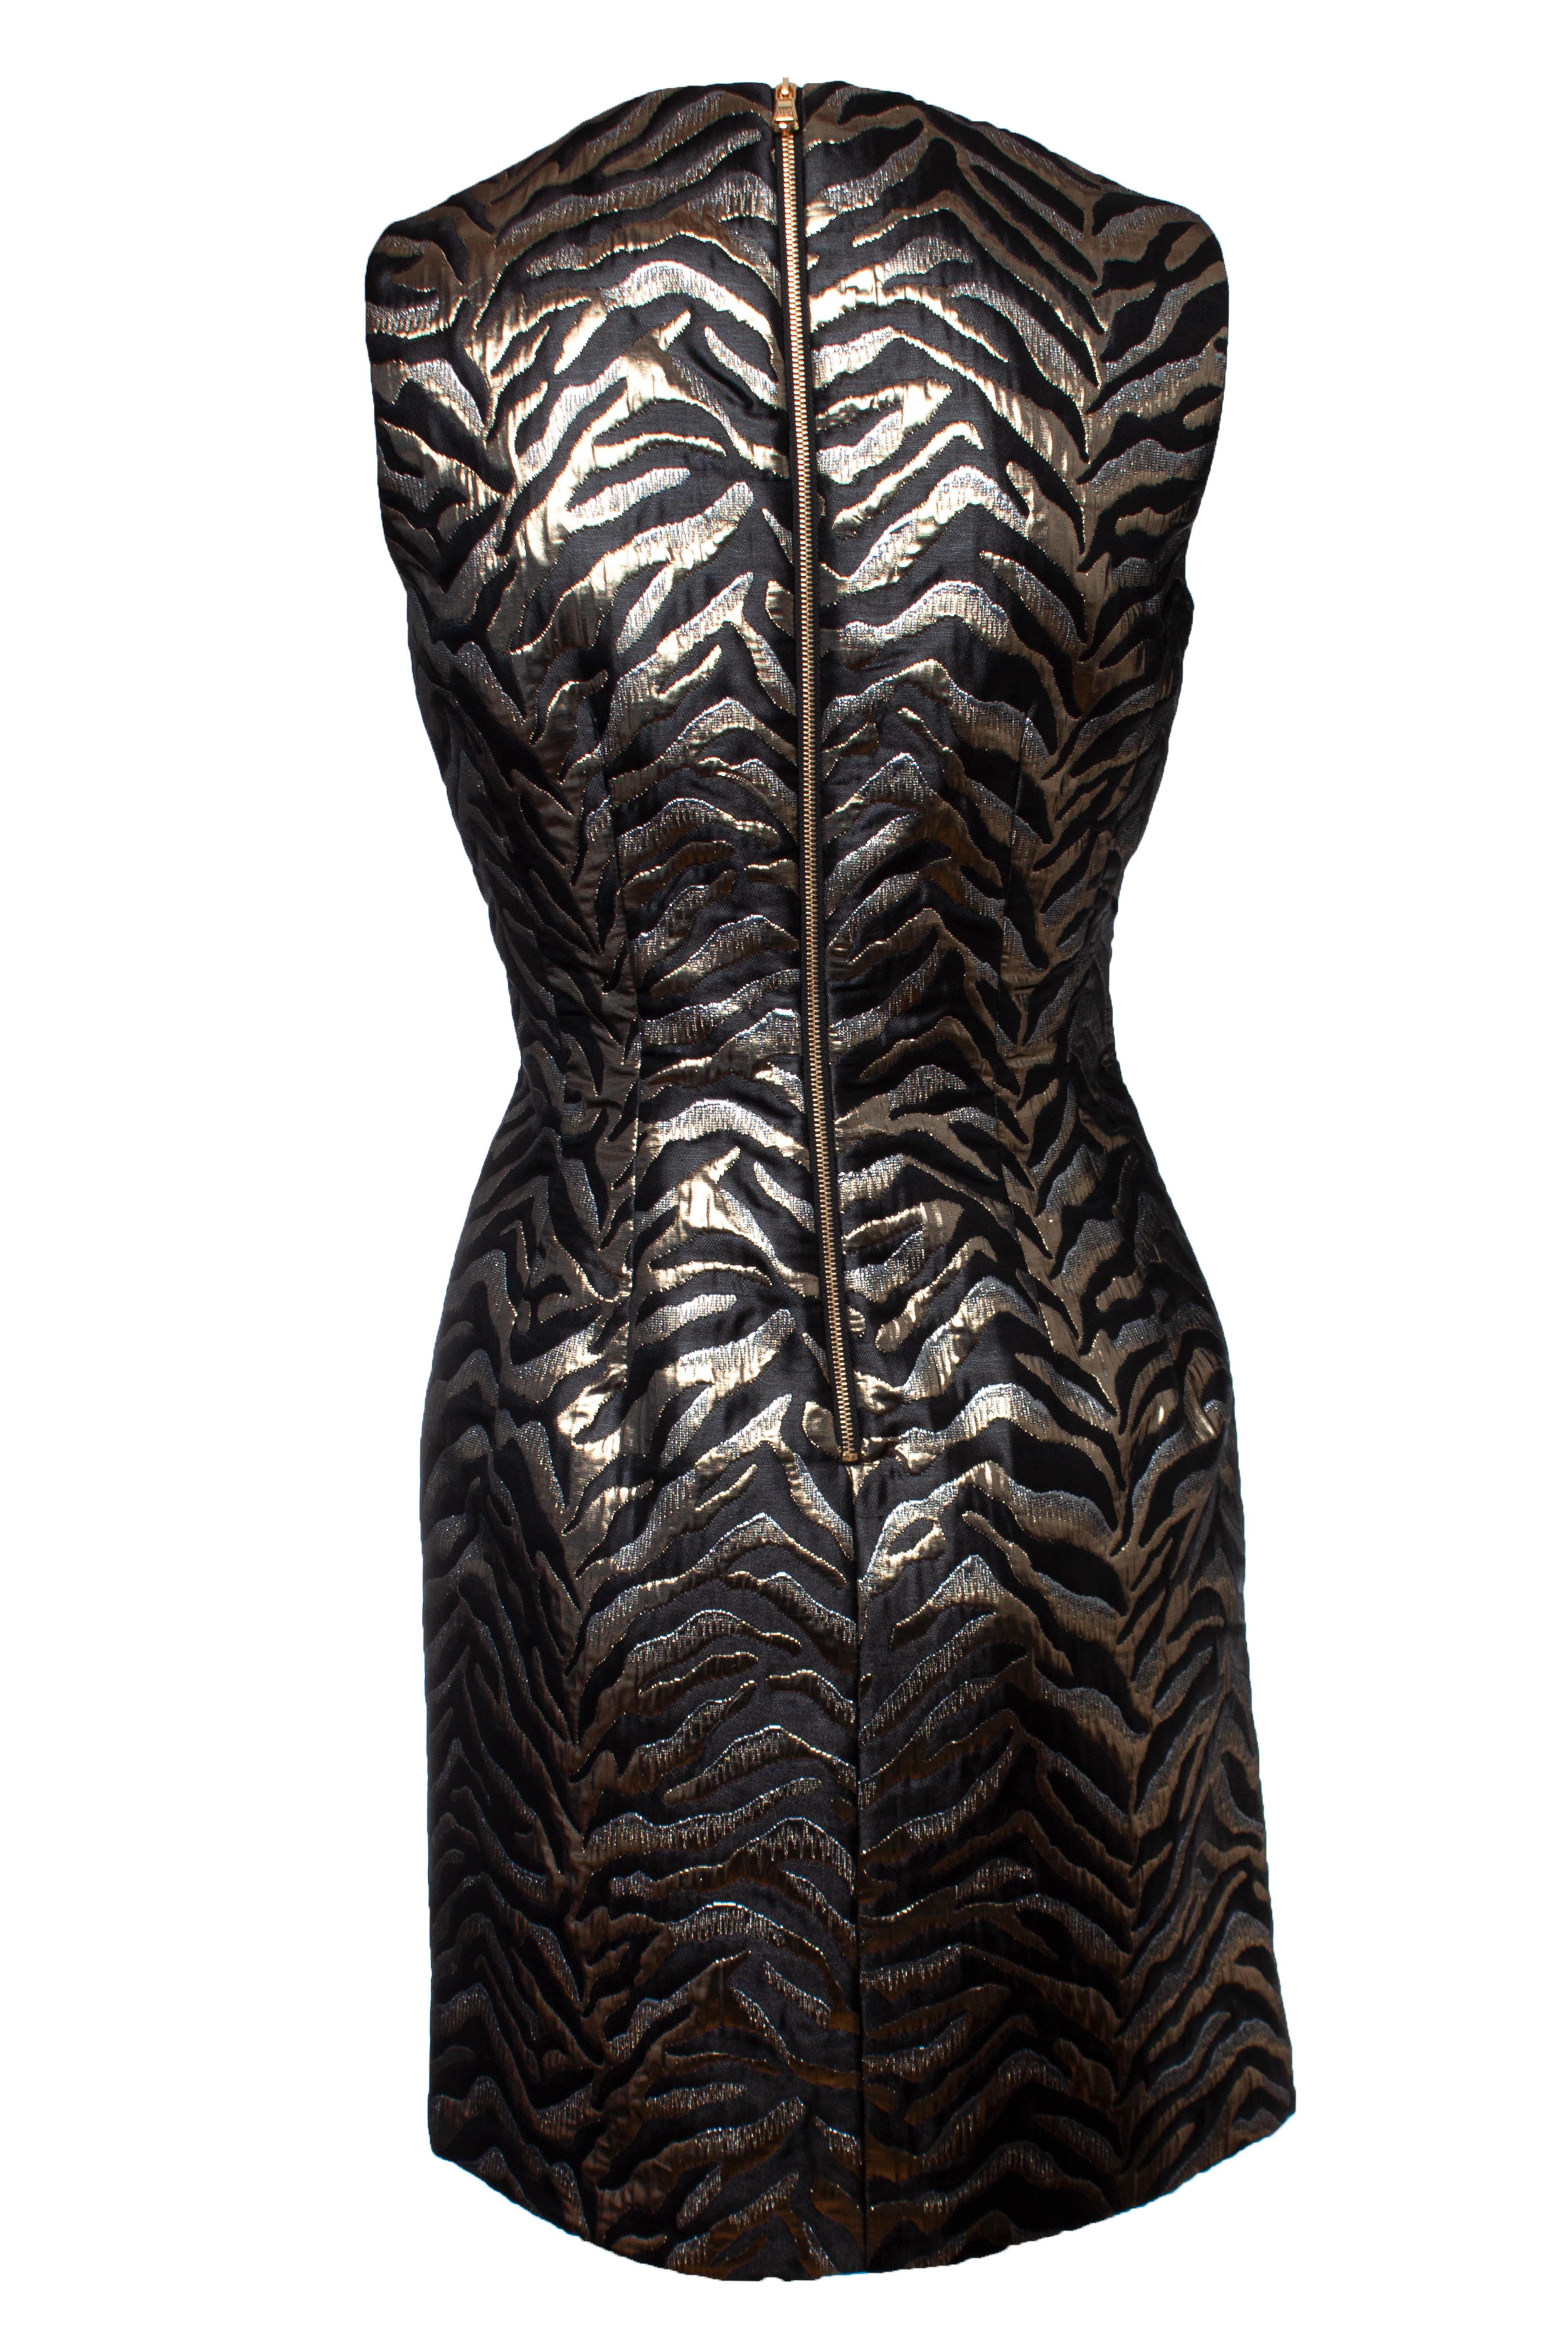 Roberto Cavalli, Lurex zebra printed dress. The item is in very good condition.

• CONDITION: very good condition 

• SIZE: IT42 - S 

• MEASUREMENTS: length 85 cm, width 42 cm, waist 36 cm

• MATERIAL: 100% polyester 

• CARE: very cleaning 

•